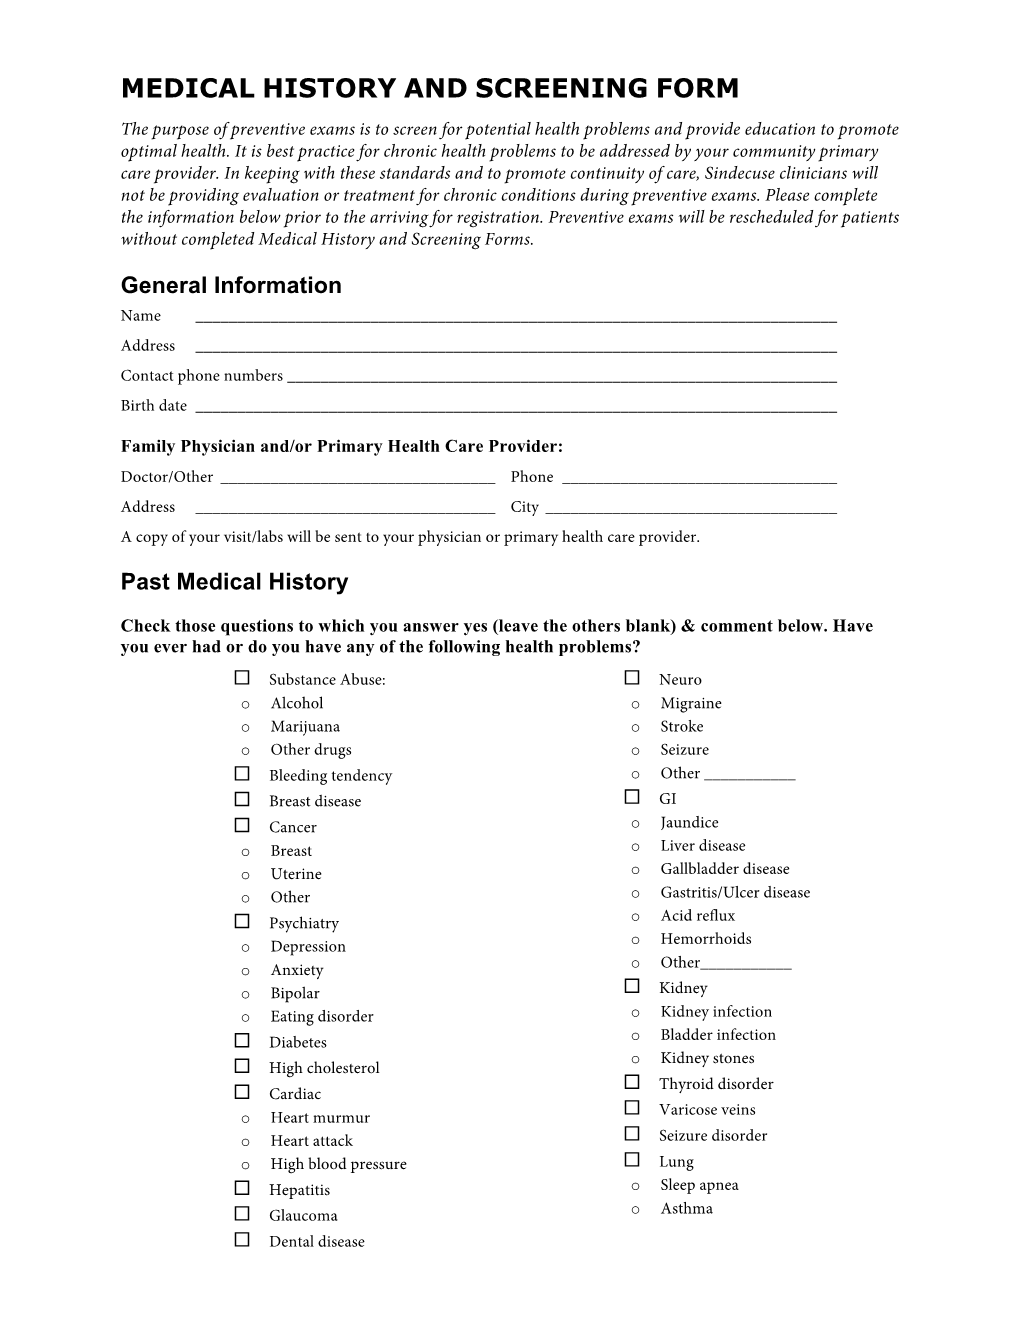 Medical History and Screening Form